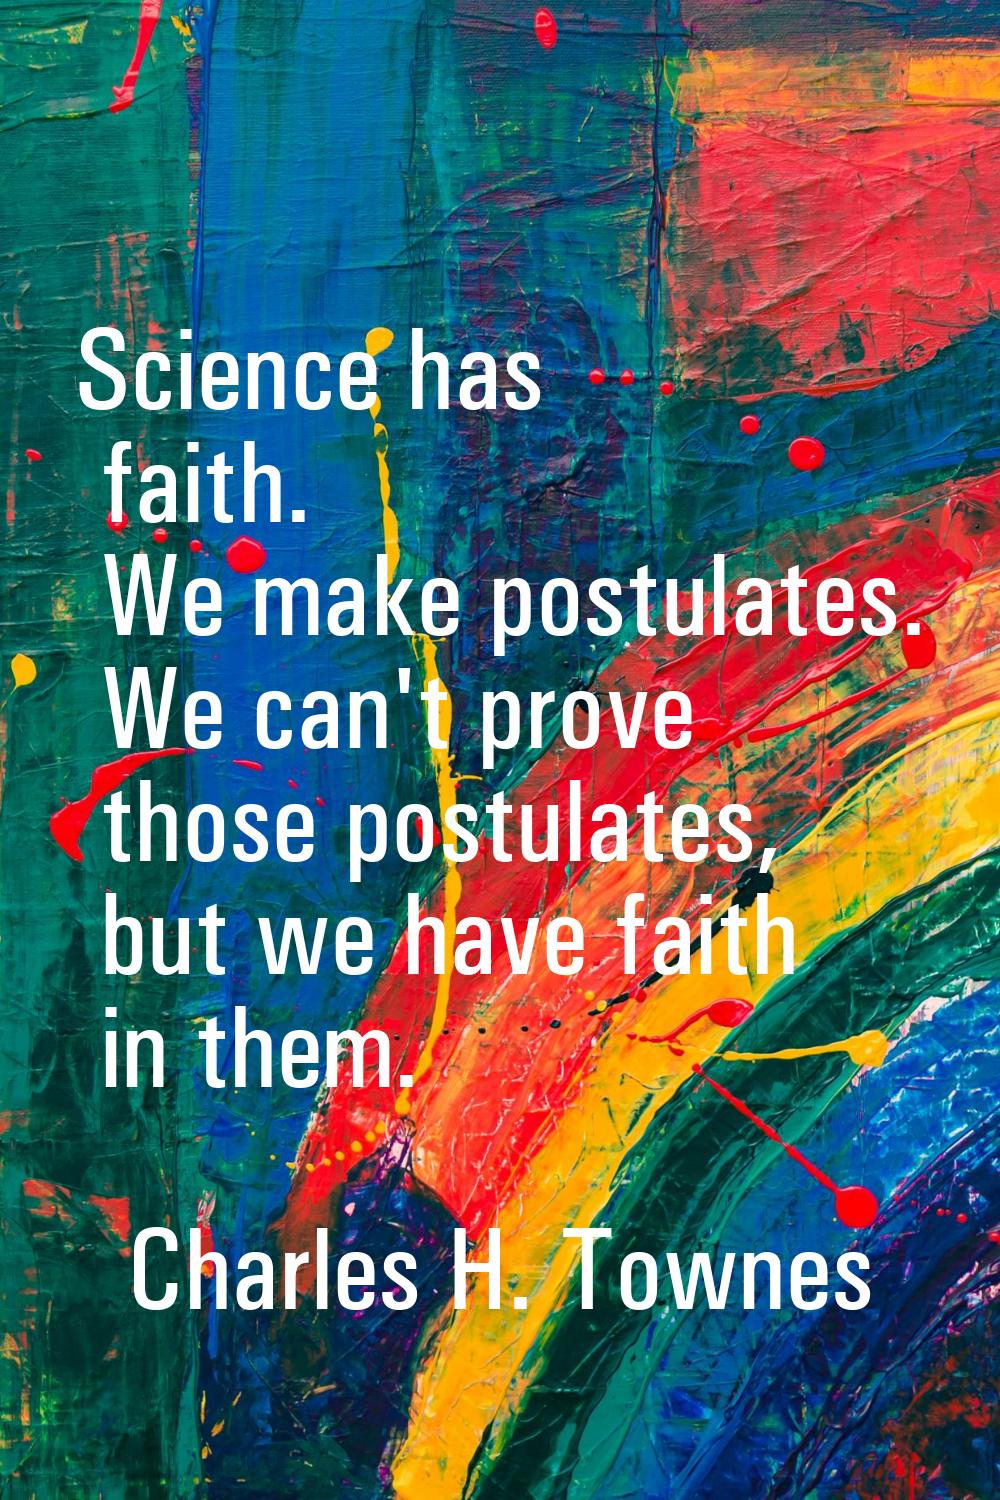 Science has faith. We make postulates. We can't prove those postulates, but we have faith in them.